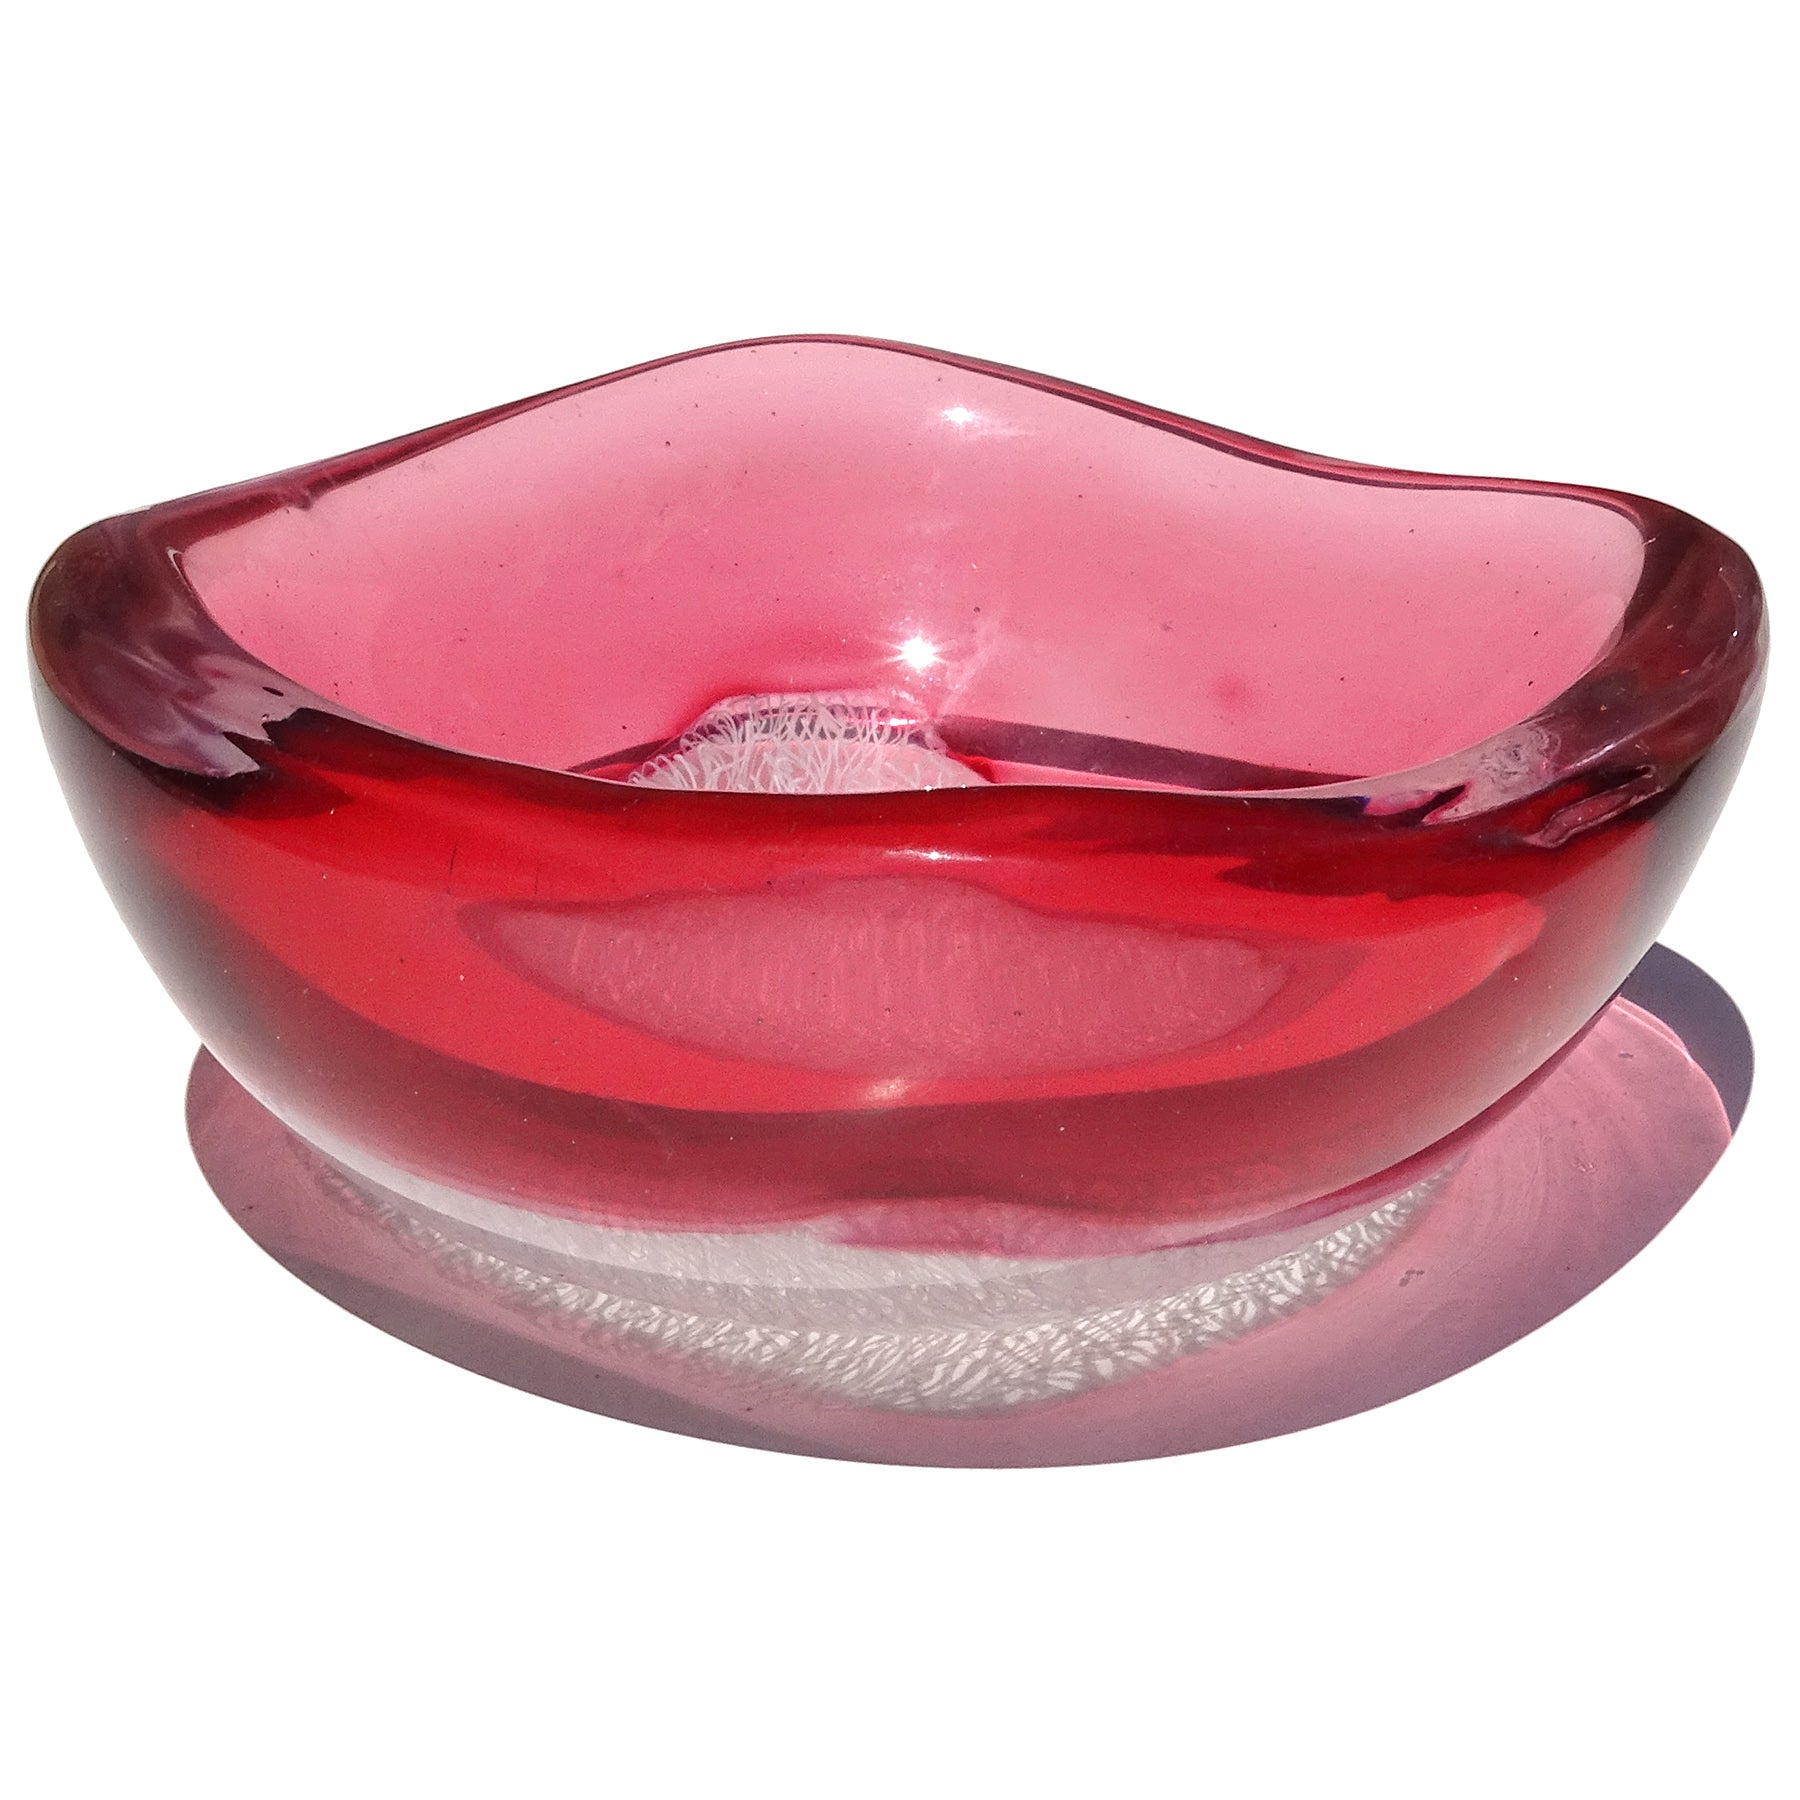 Hand-Crafted Archimede Seguso Murano 1952 Pink White Merletto Ribbons Italian Art Glass Bowl For Sale